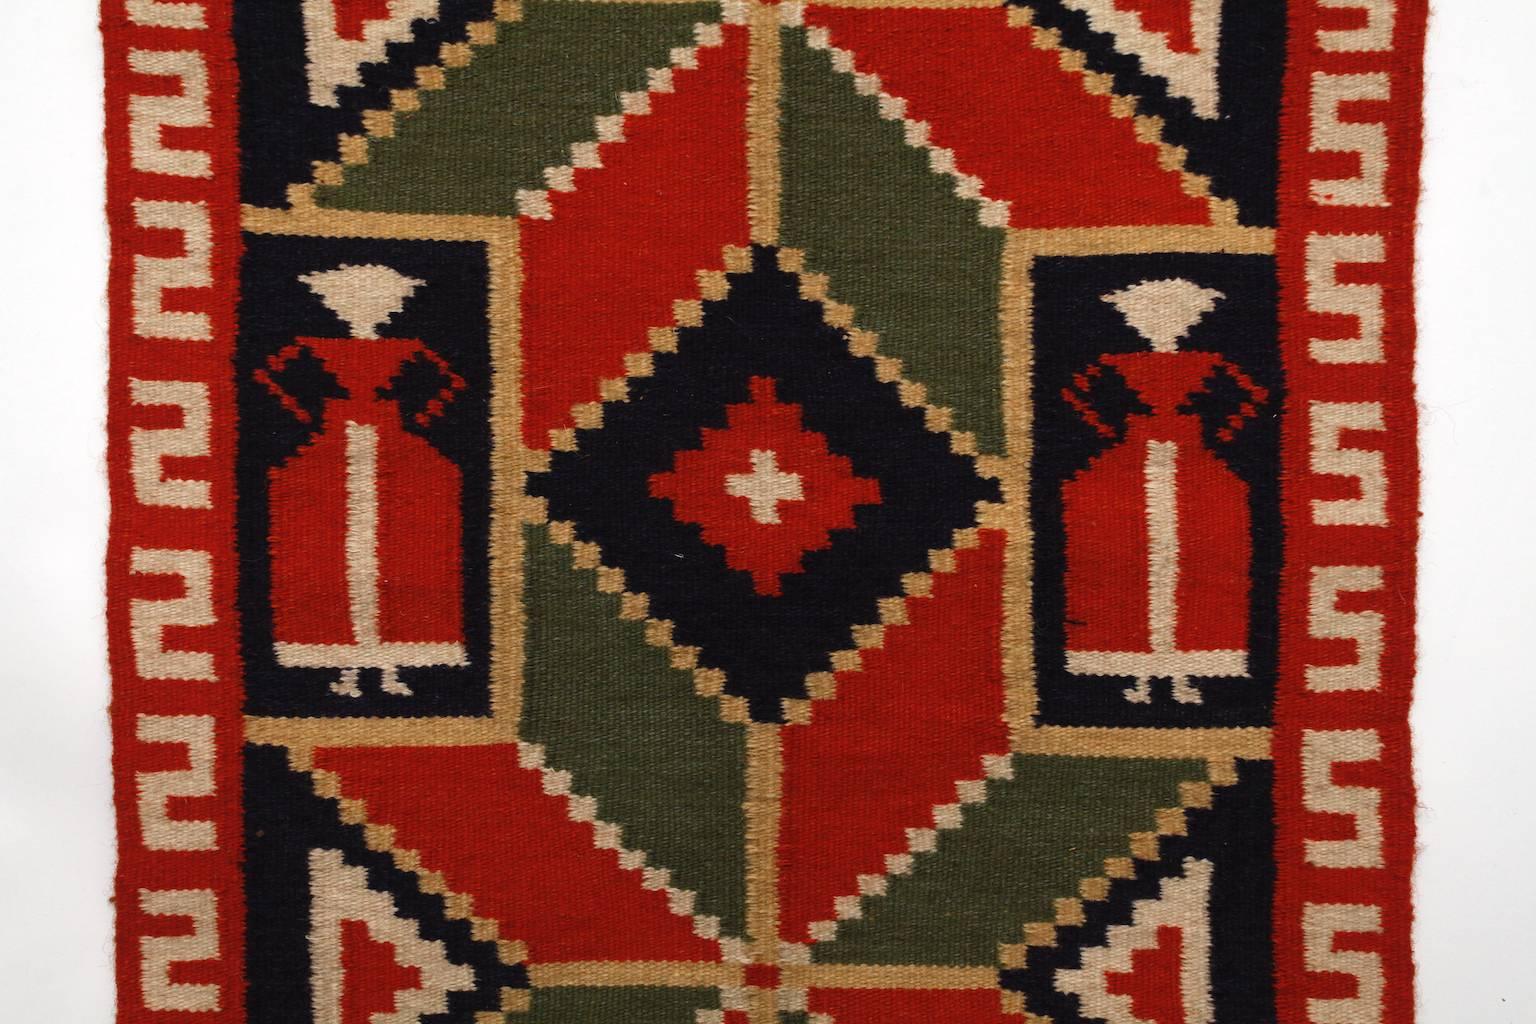 Folk Art Handwoven Swedish Wool Tapestry with Two Women in the Shape of an 